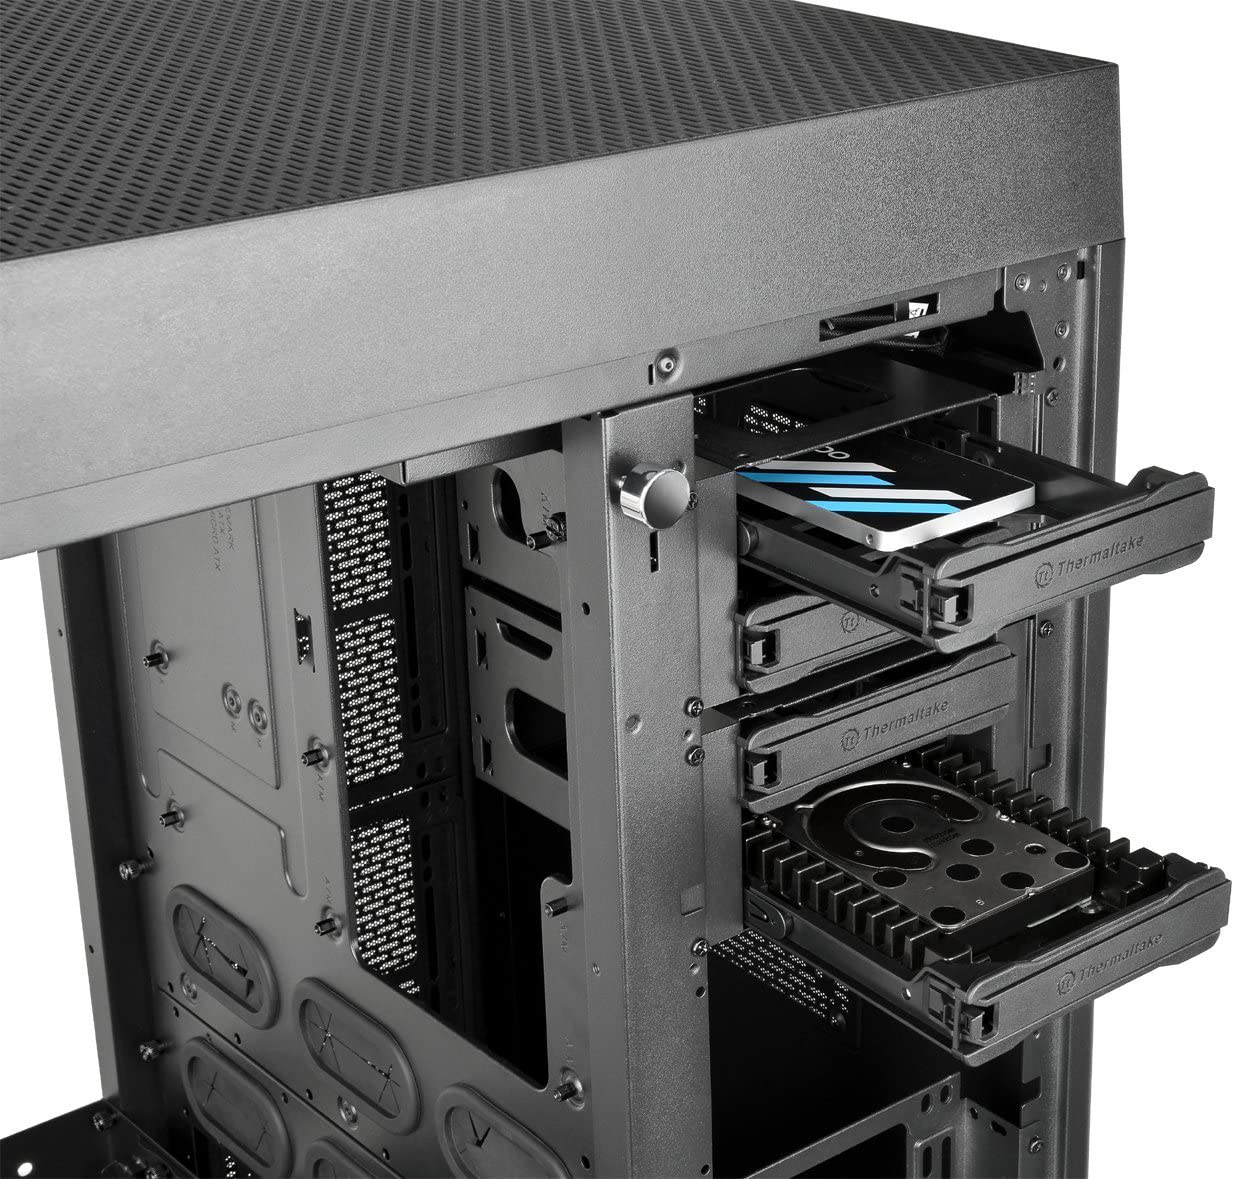 Thermaltake Tower 900 Black Edition Tempered Glass Fully Modular E-ATX Vertical Super Tower Computer Chassis CA-1H1-00F1WN-00